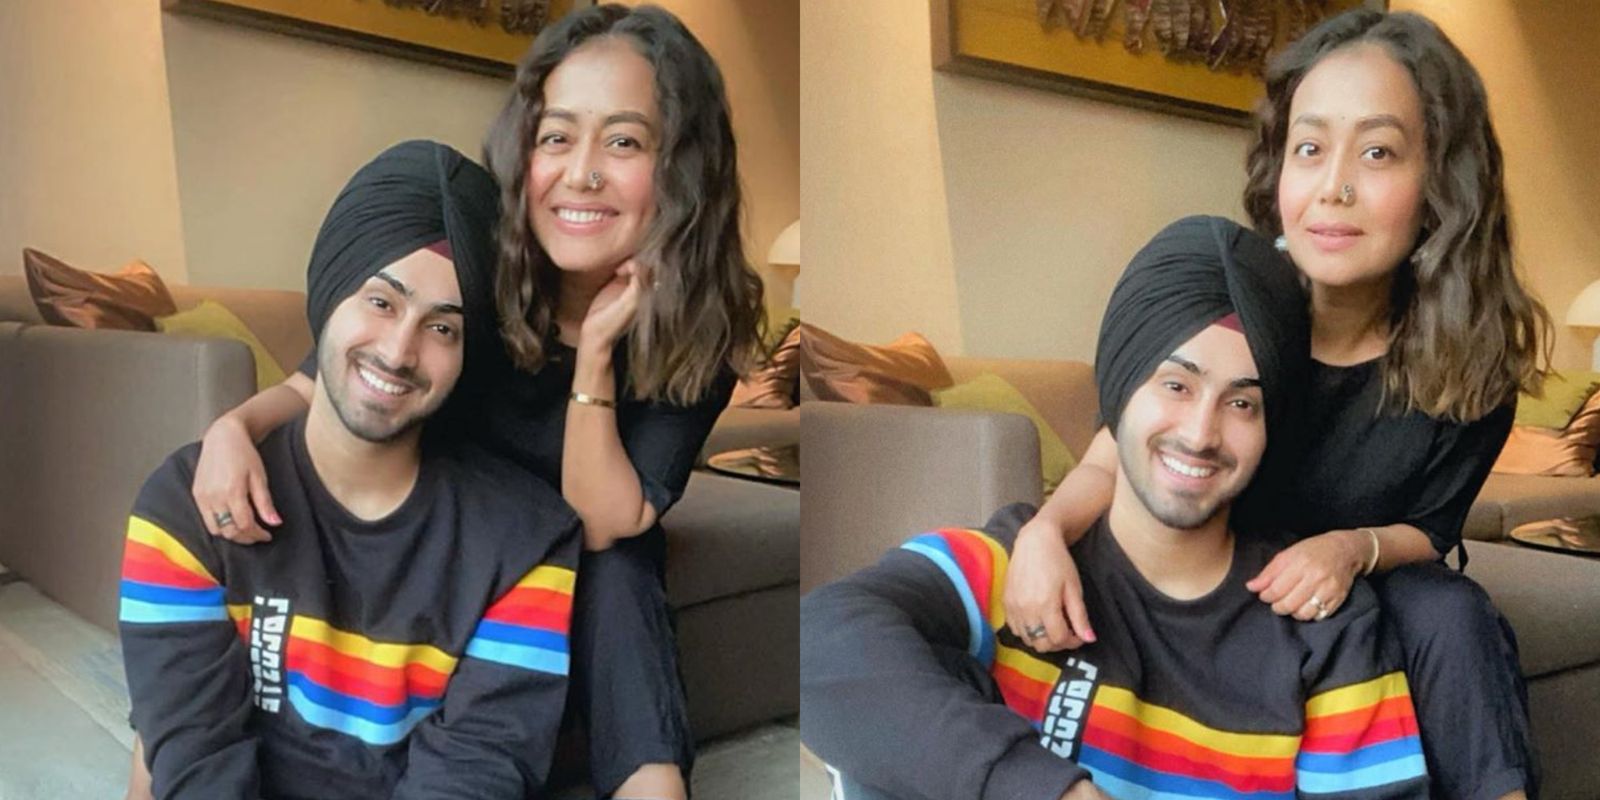 Neha Kakkar Shares Loved Up Photo With Rumored Fiancé Rohanpreet Singh And Confirms Their Relationship